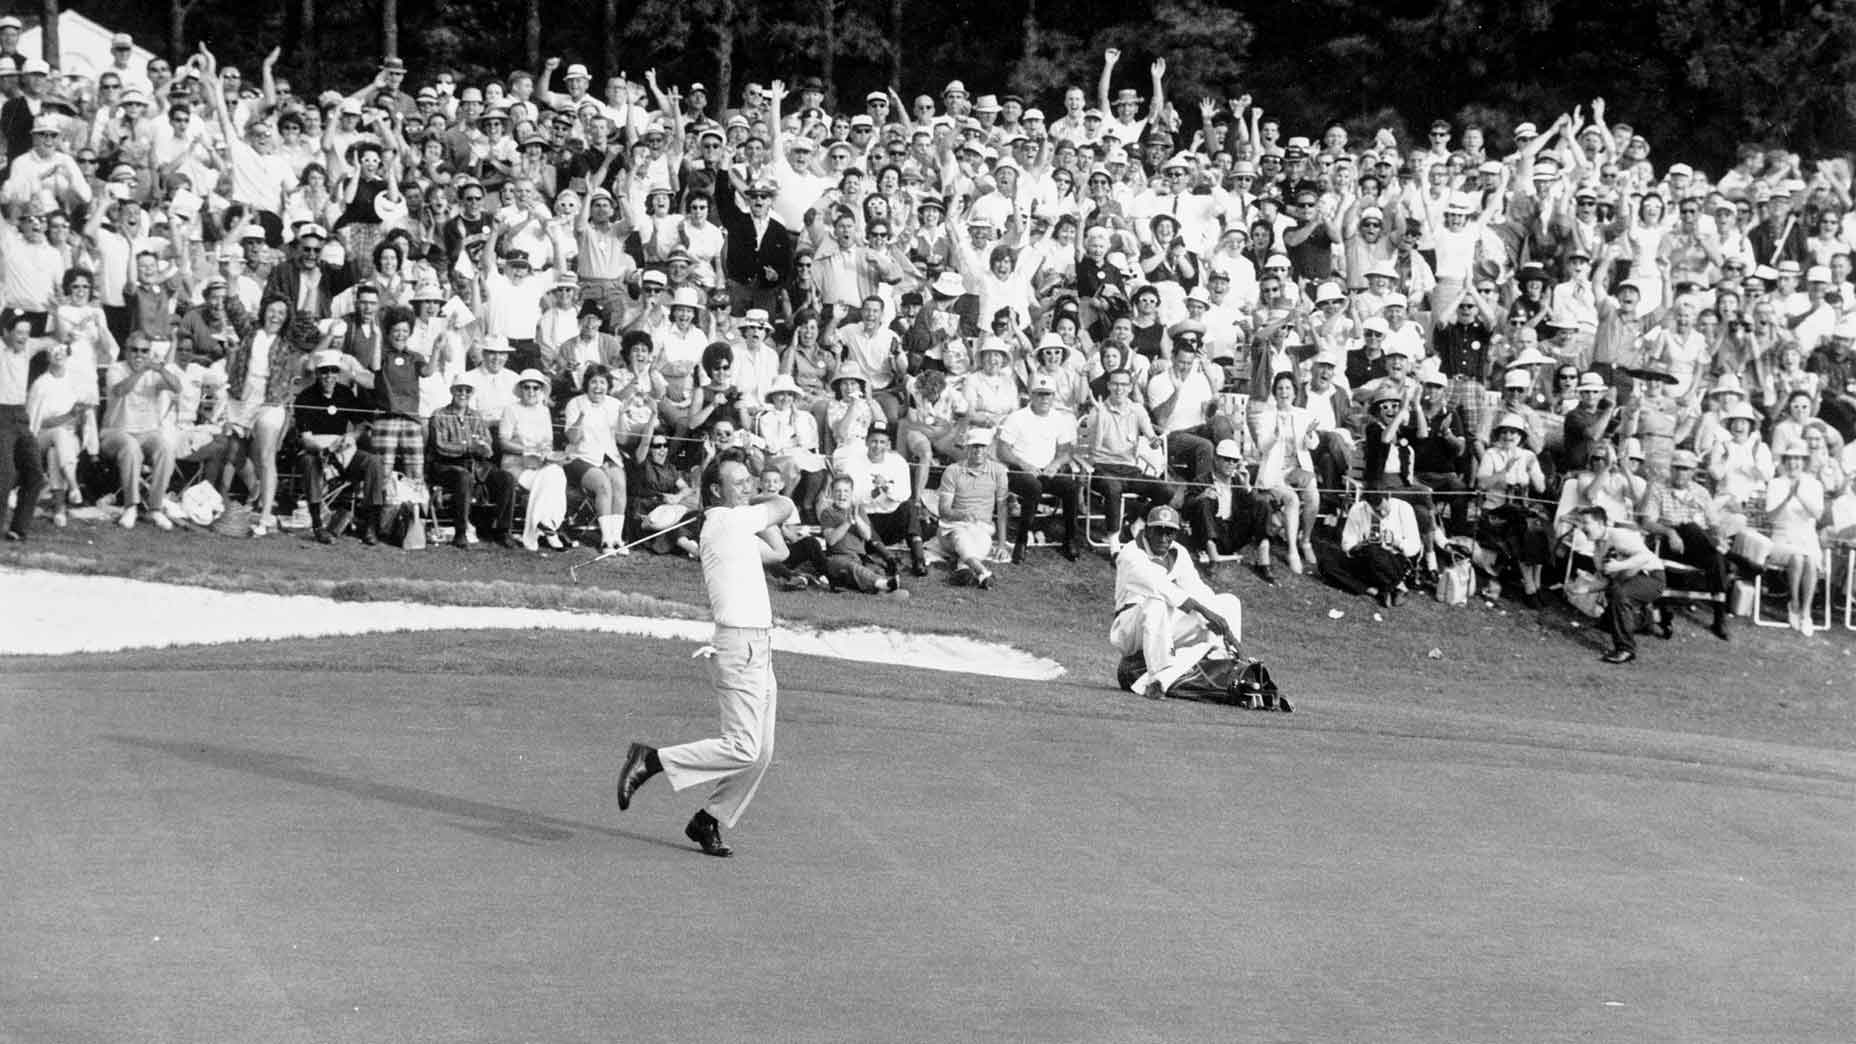 Arnold Palmer at the ’64 Masters. No one guessed it would be his last winning putt at a major.